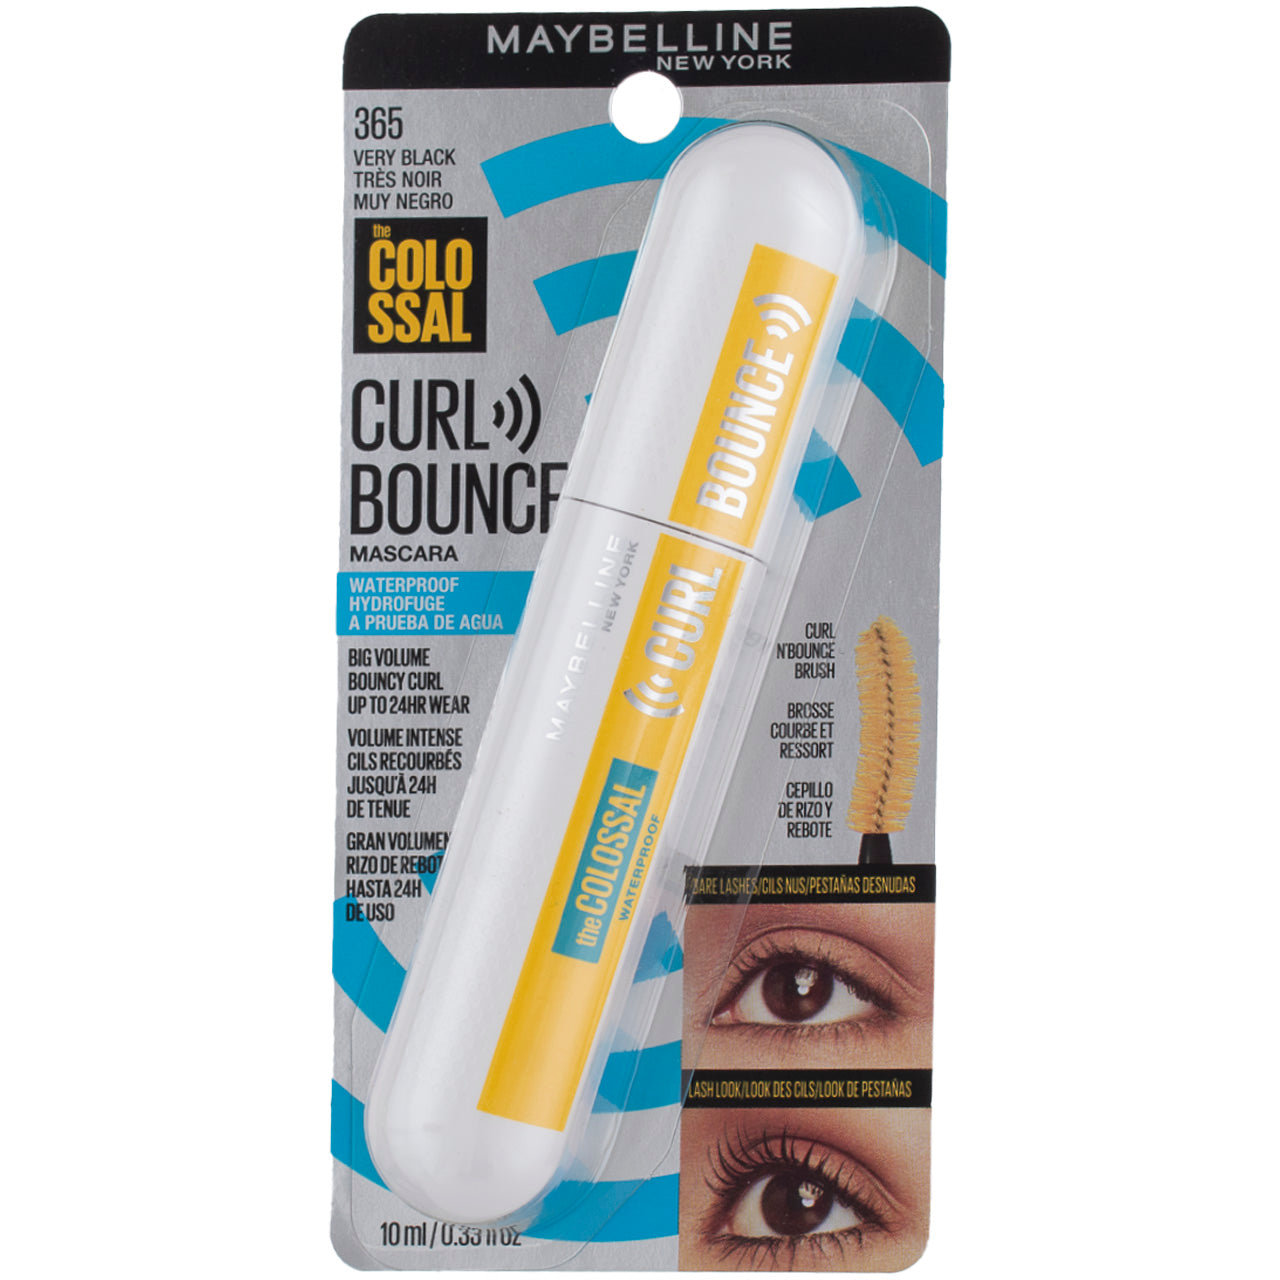 Very – Bouncing Vitabox The 365, Mascara, Curl Black 0.33 Colossal Maybelline fl